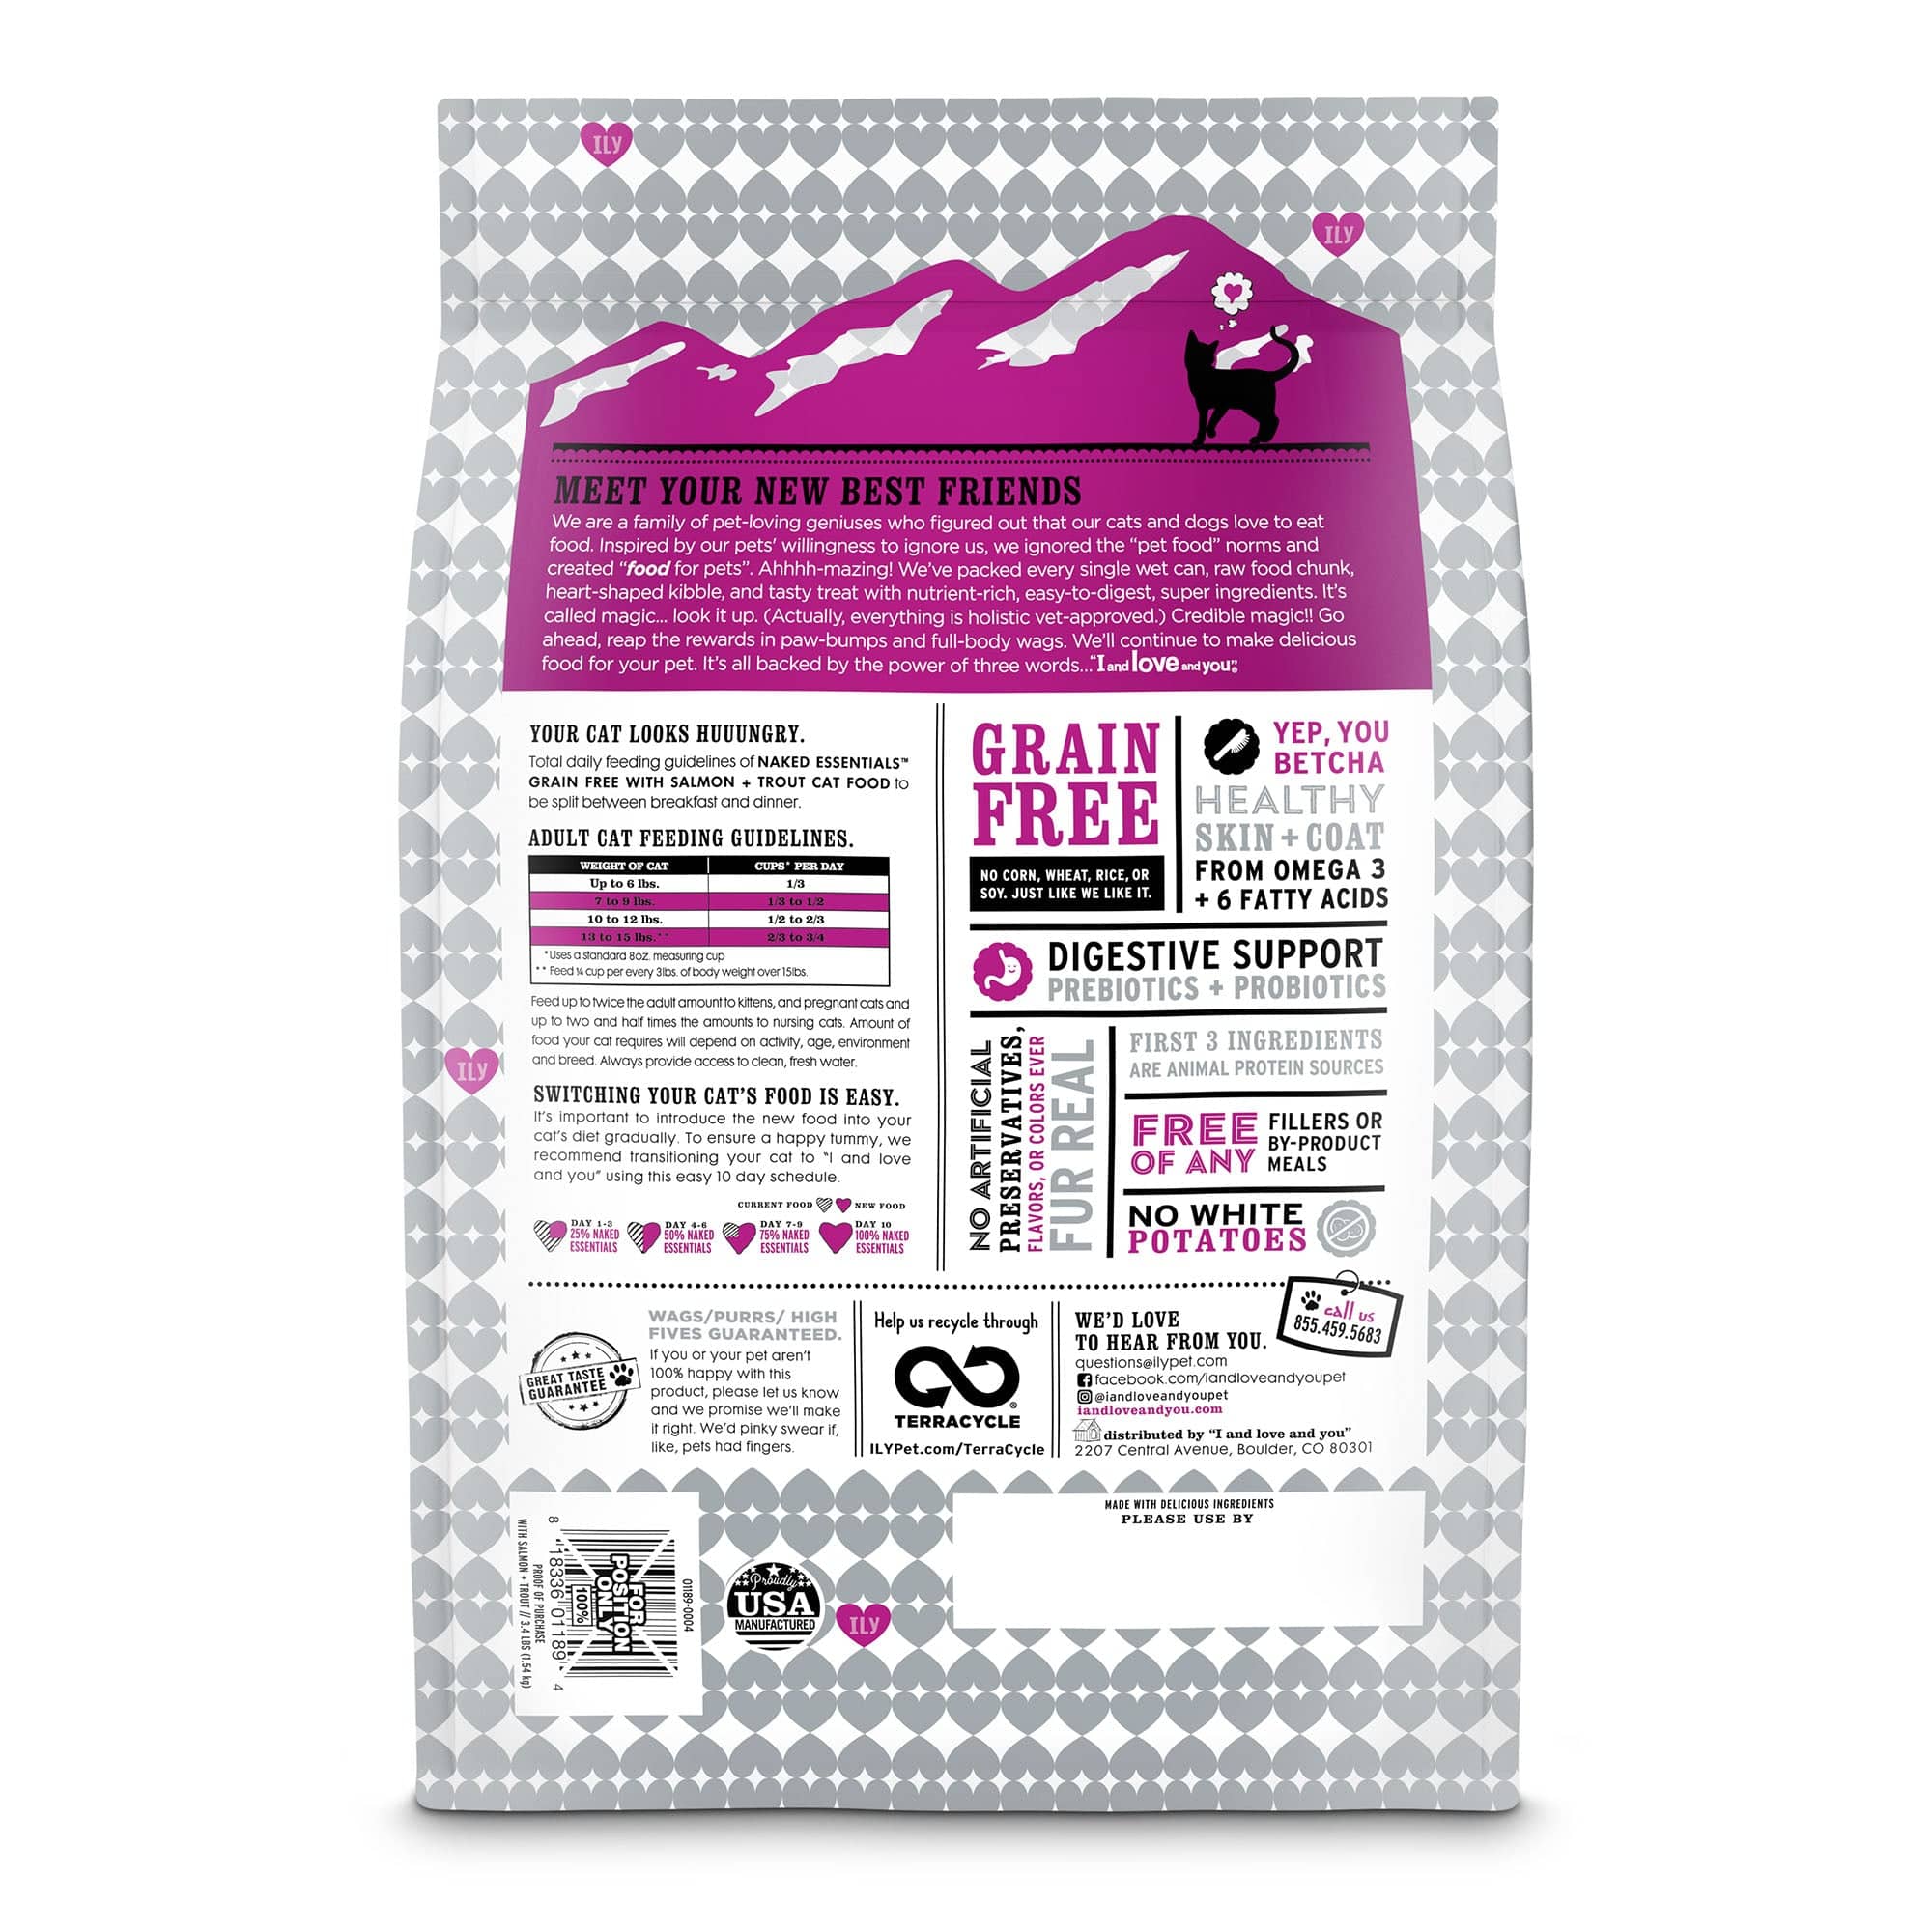 Naked Essentials kibble bag back side with list of ingredients, instructions and barcode